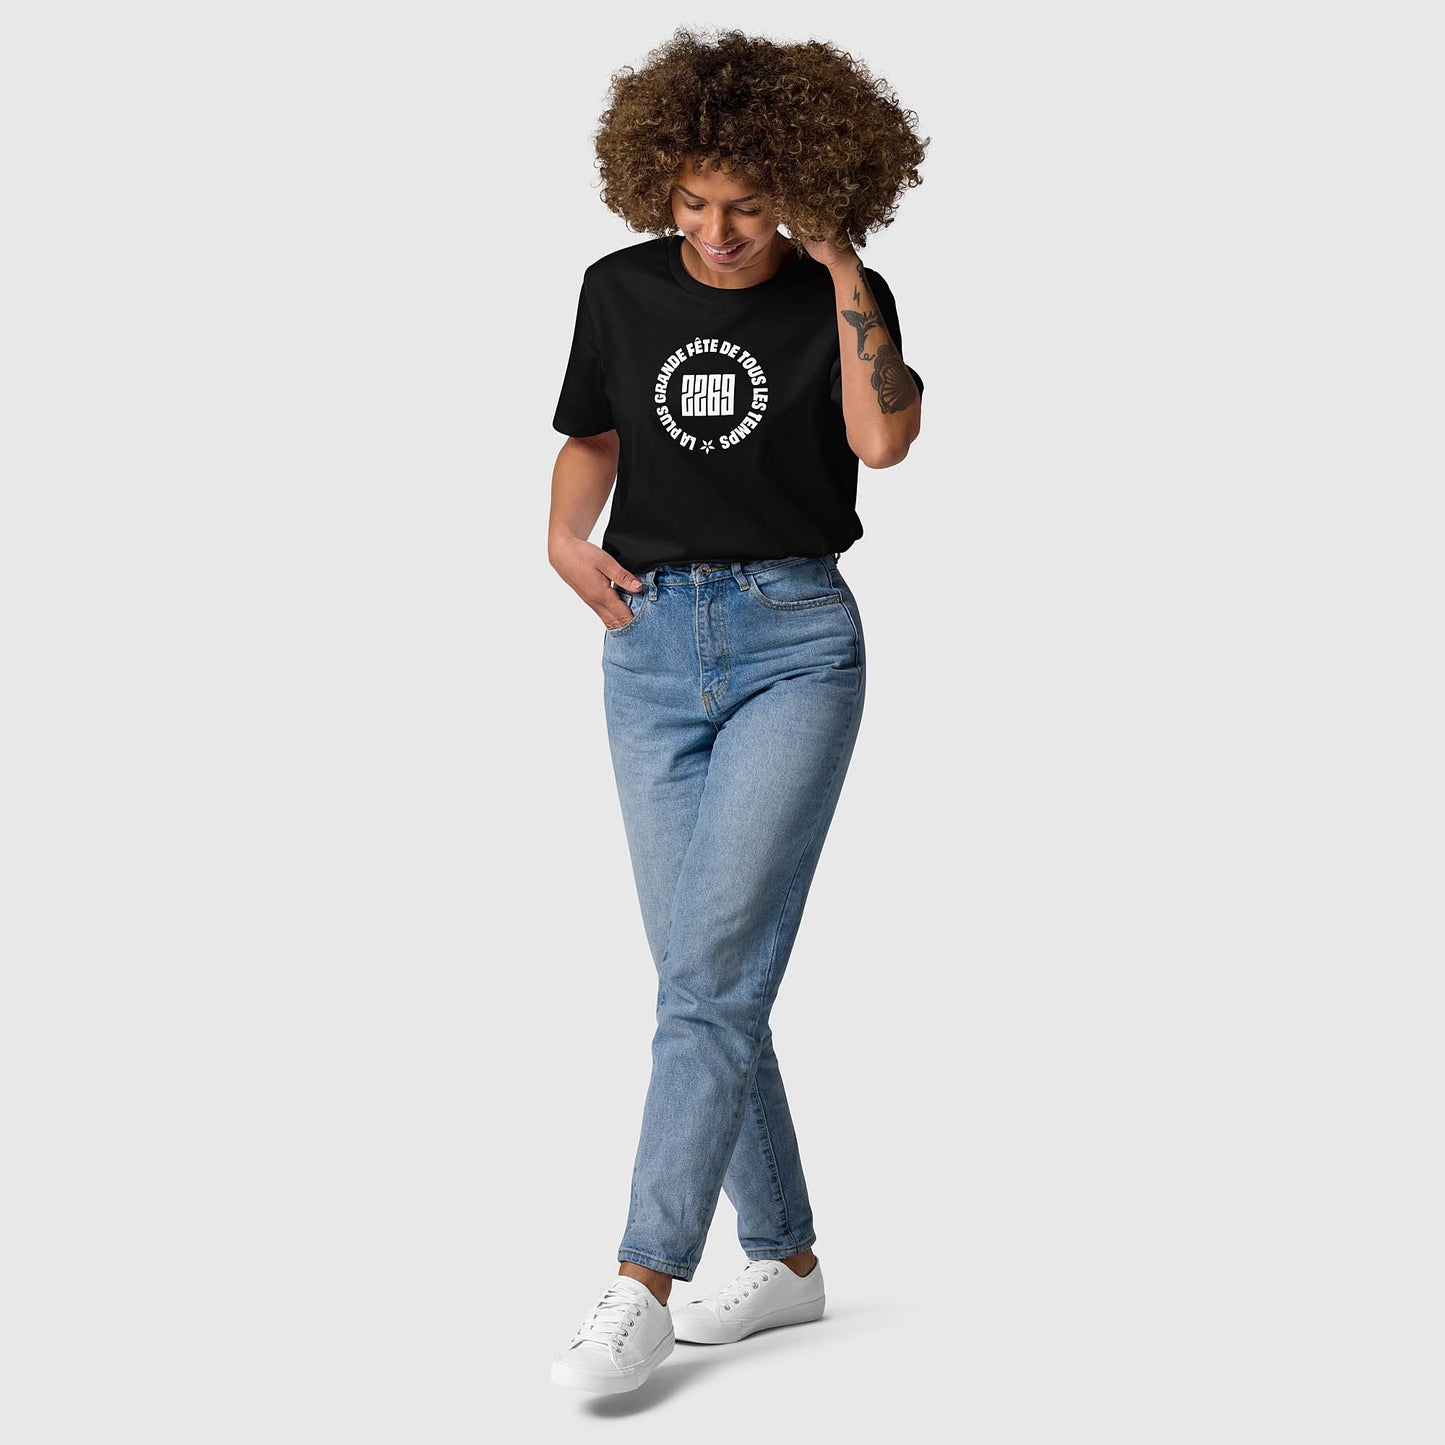 Unisex black organic cotton t-shirt with French 2269 party circle